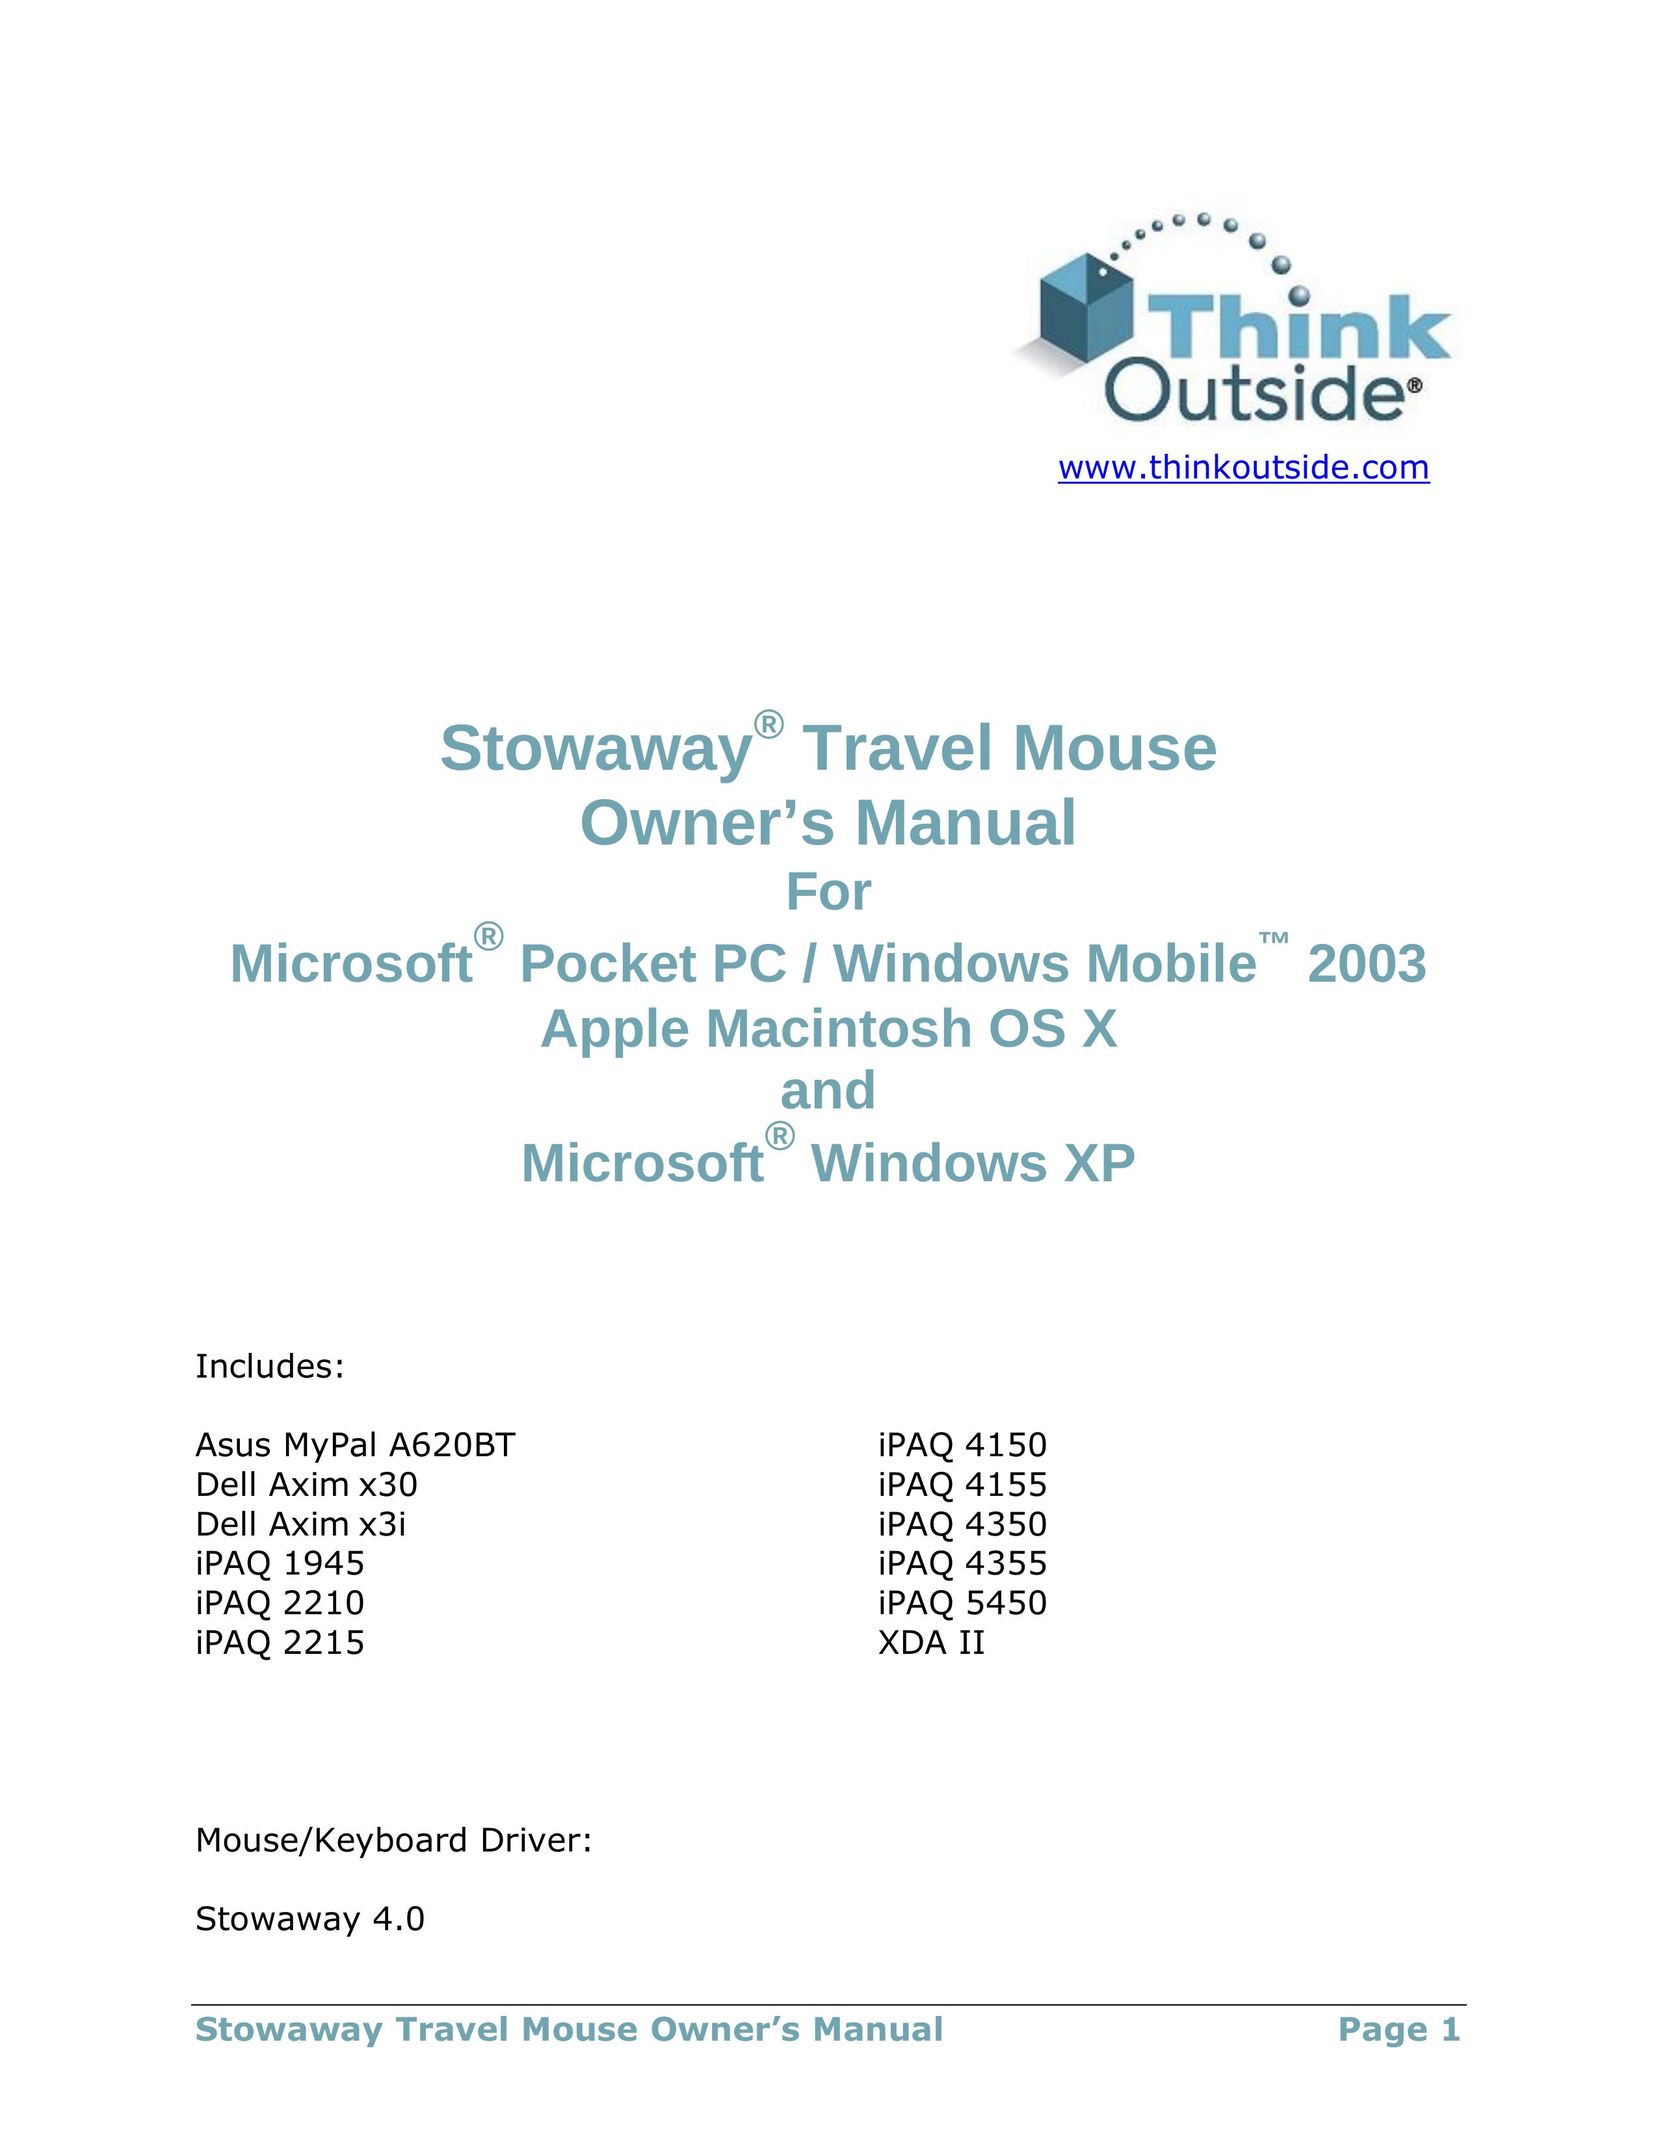 Think Outside Travel Mouse (for iPAQ 1945) PDAs & Smartphones User Manual